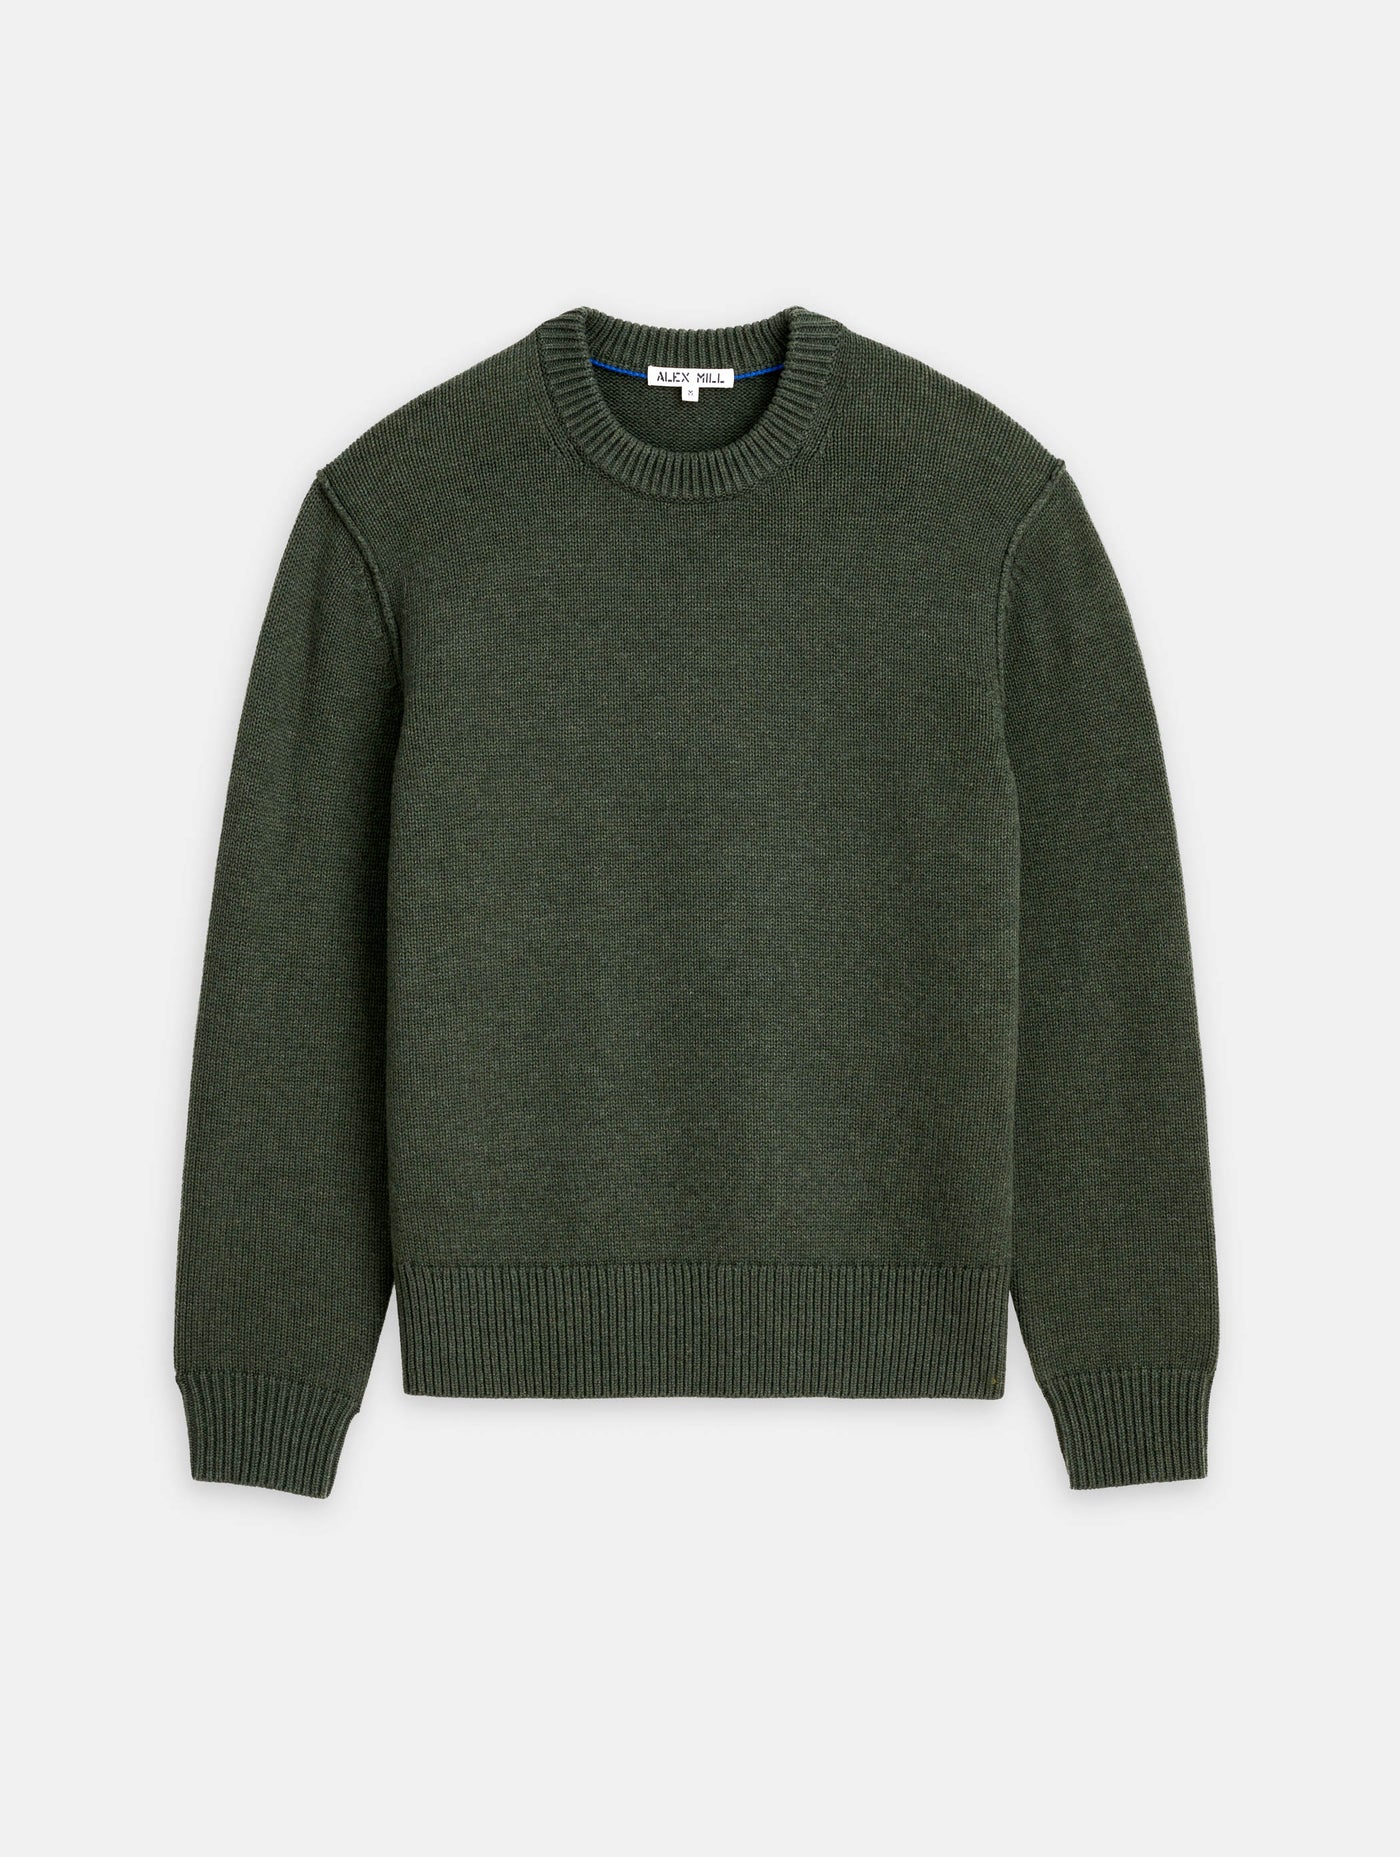 Weston Pullover in Wool Cotton